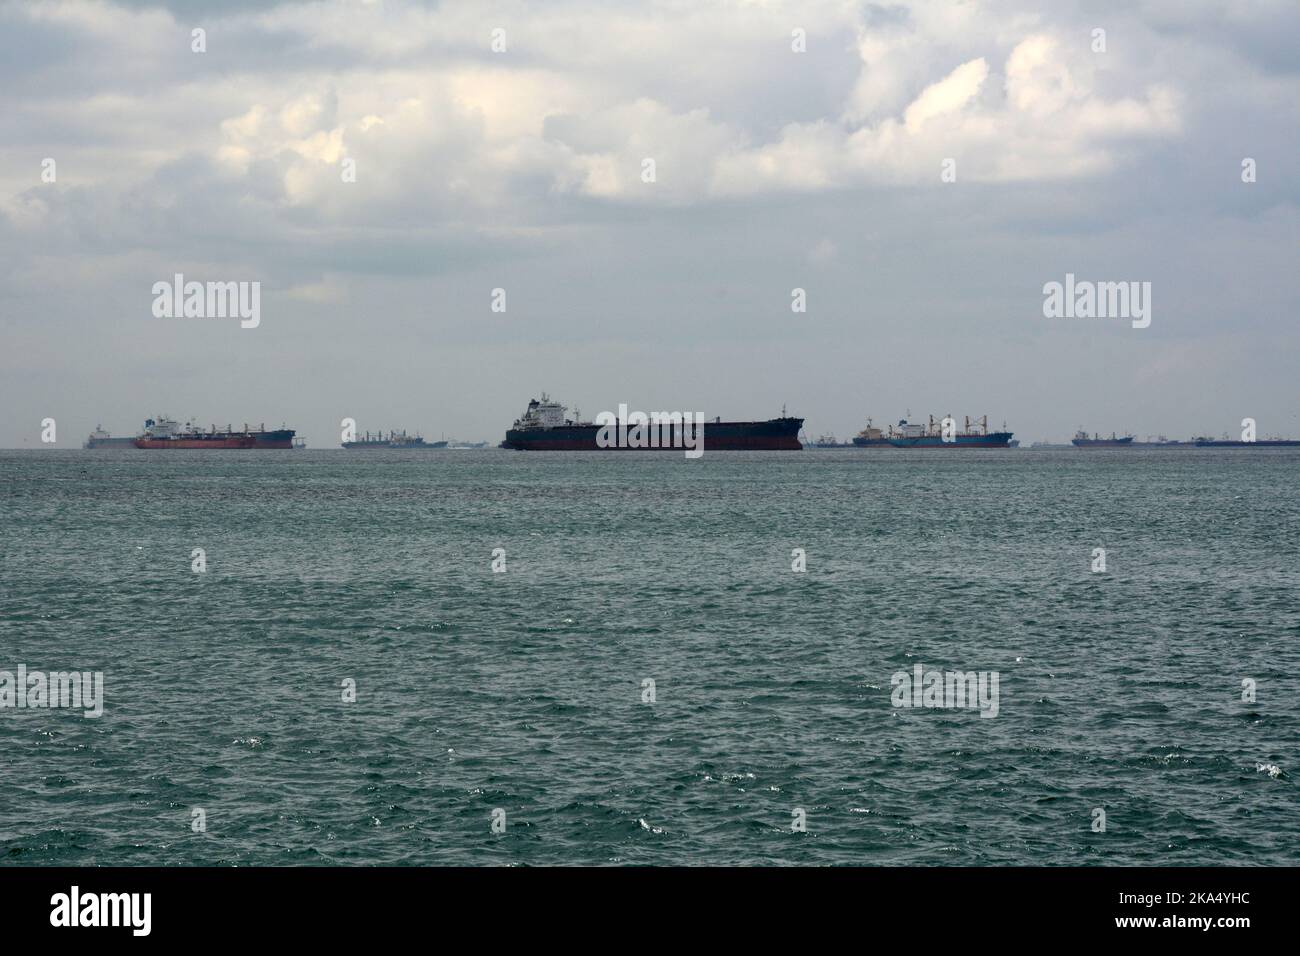 Bulk carrier merchant grain ships bound for Ukraine and Russia await entry in the Sea of Marmara at the south end of the Strait of Bosphorus, Turkey. Stock Photo